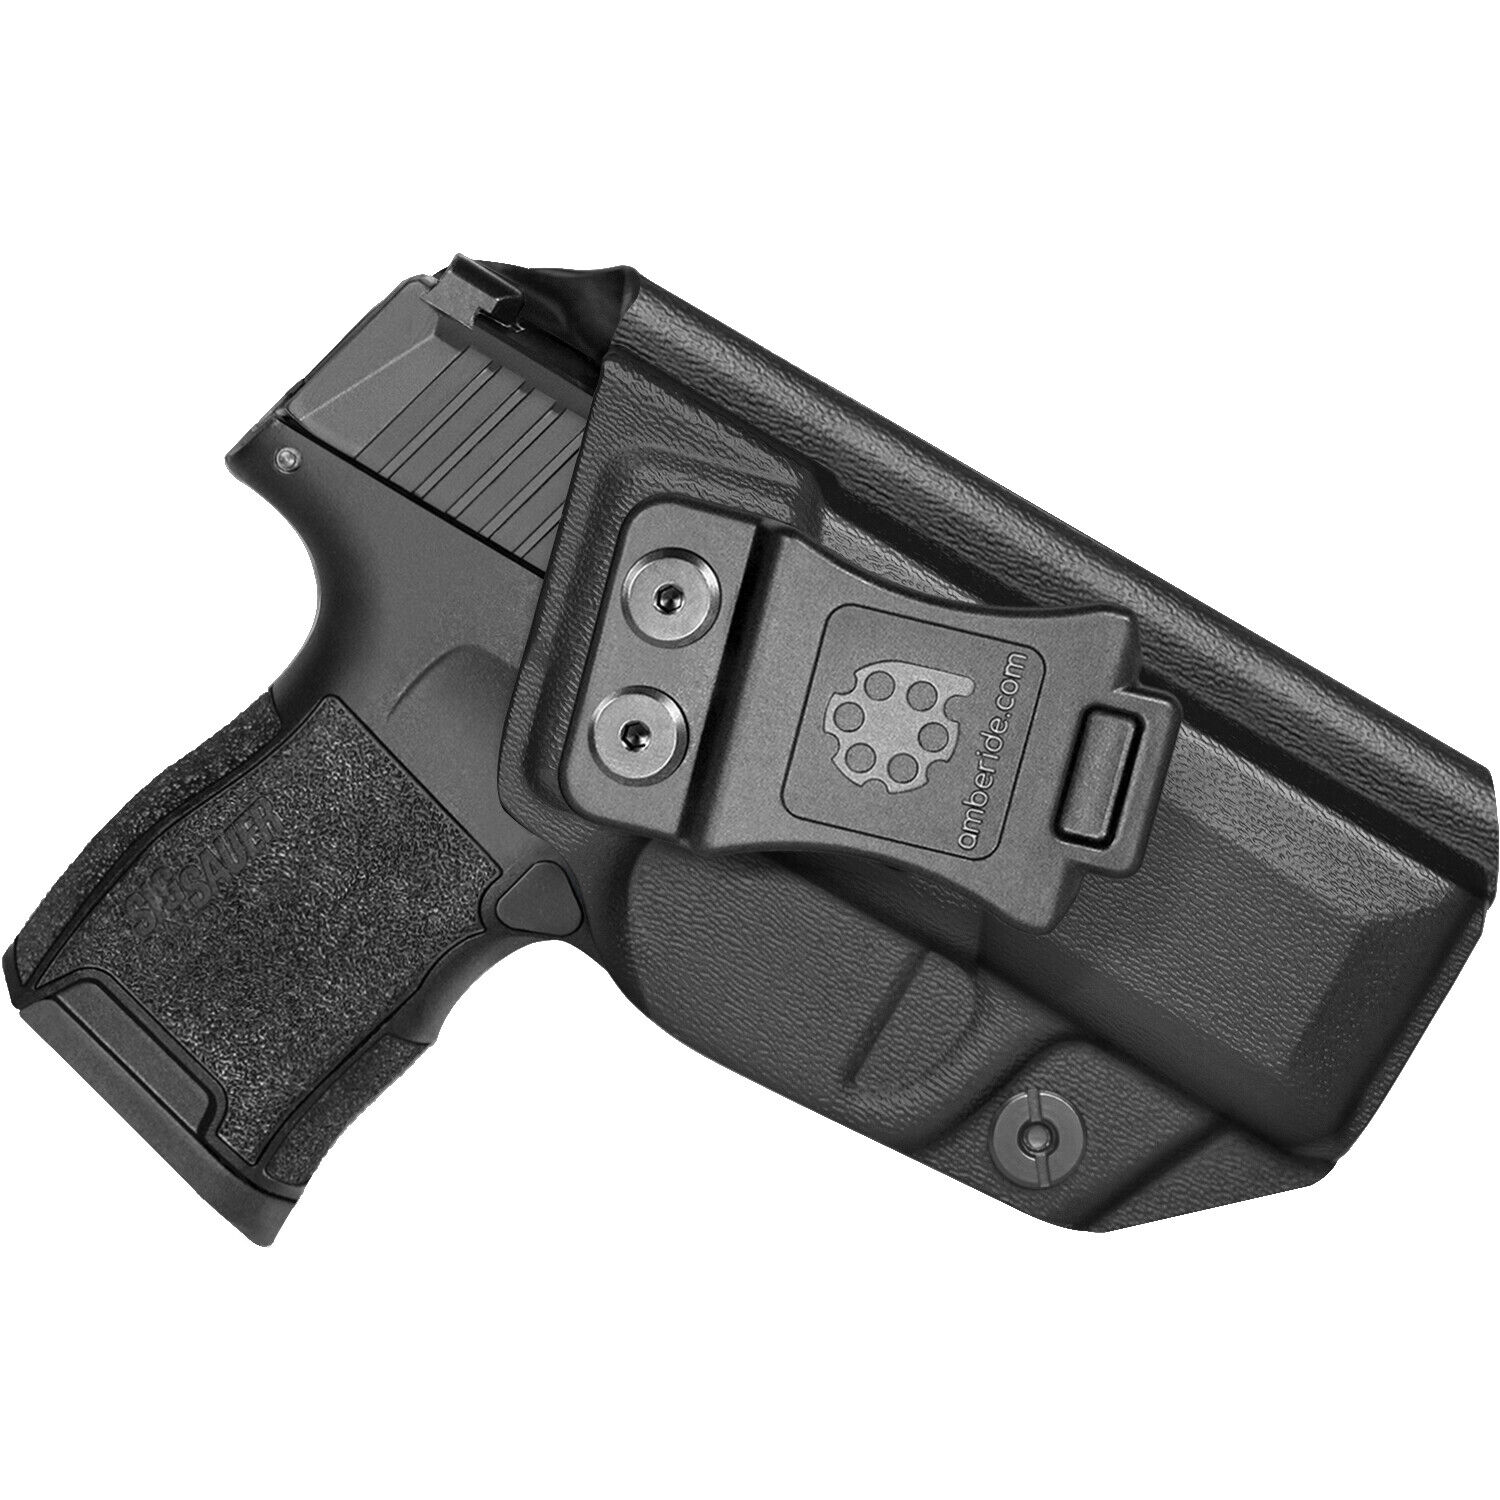 Amberide IWB/OWB KYDEX Holster Fit:Sig Sauer P365/P365 SAS W or W/O ManualSafety